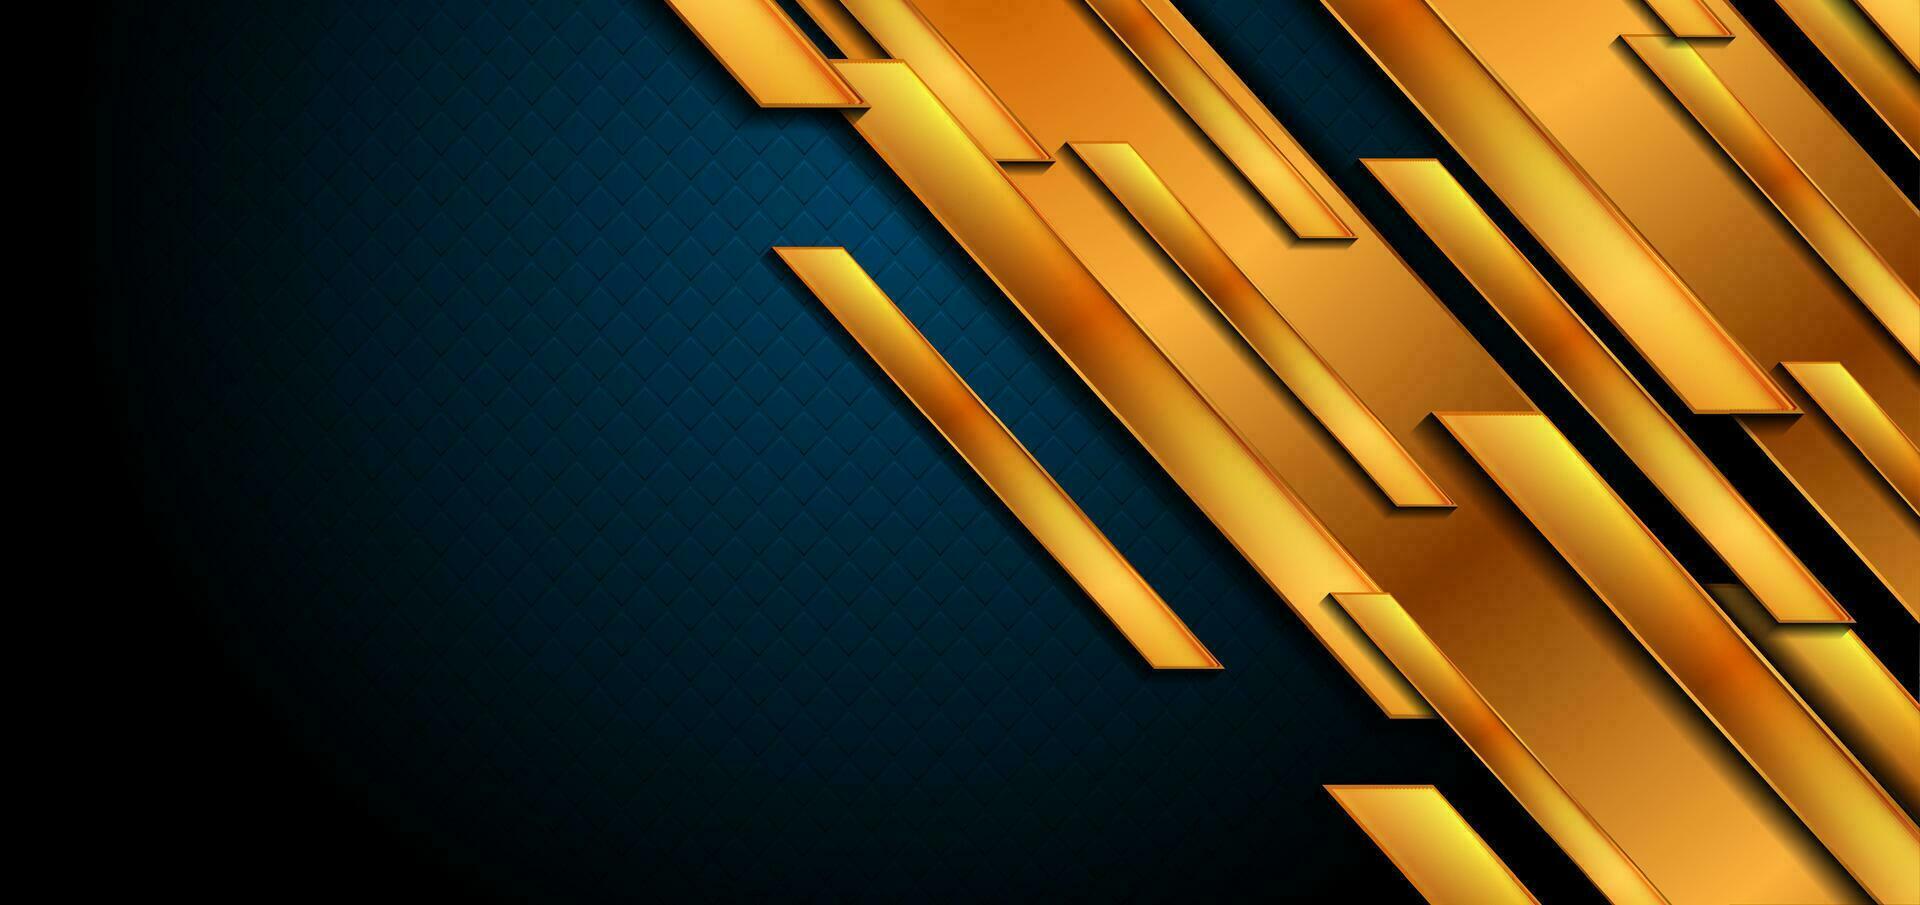 Dark blue and shiny golden abstract tech geometric background vector